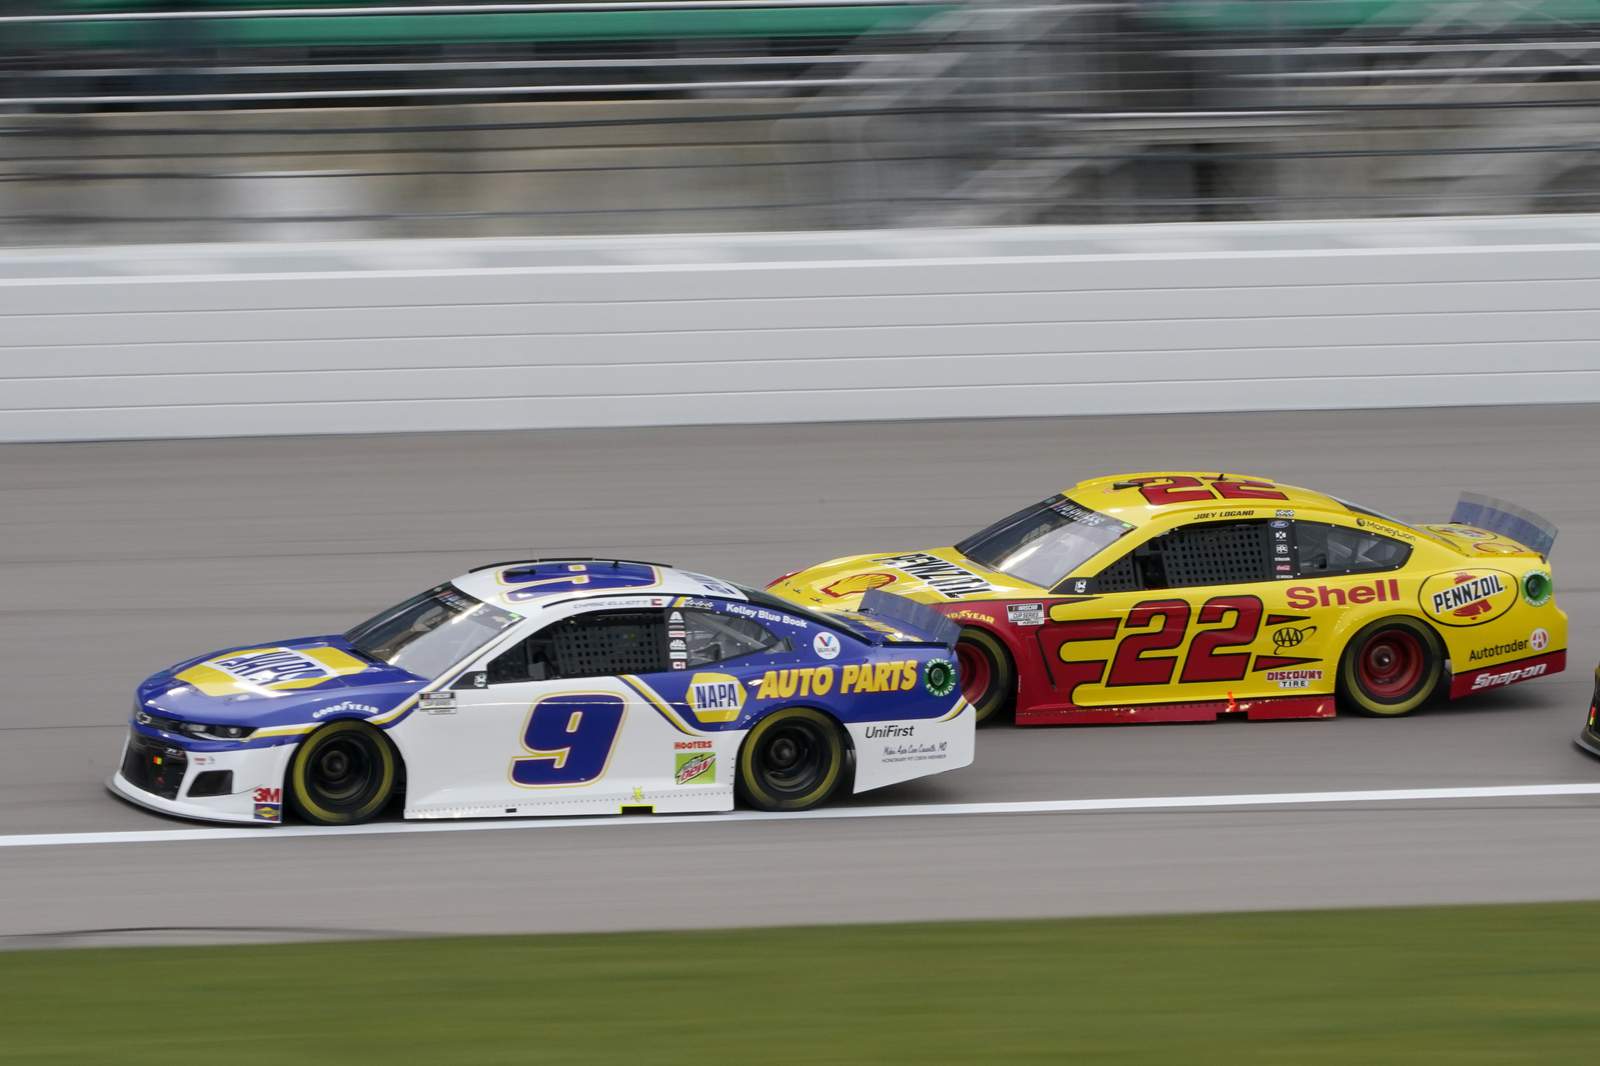 Logano wins at Kansas to clinch spot in Cup Series finale